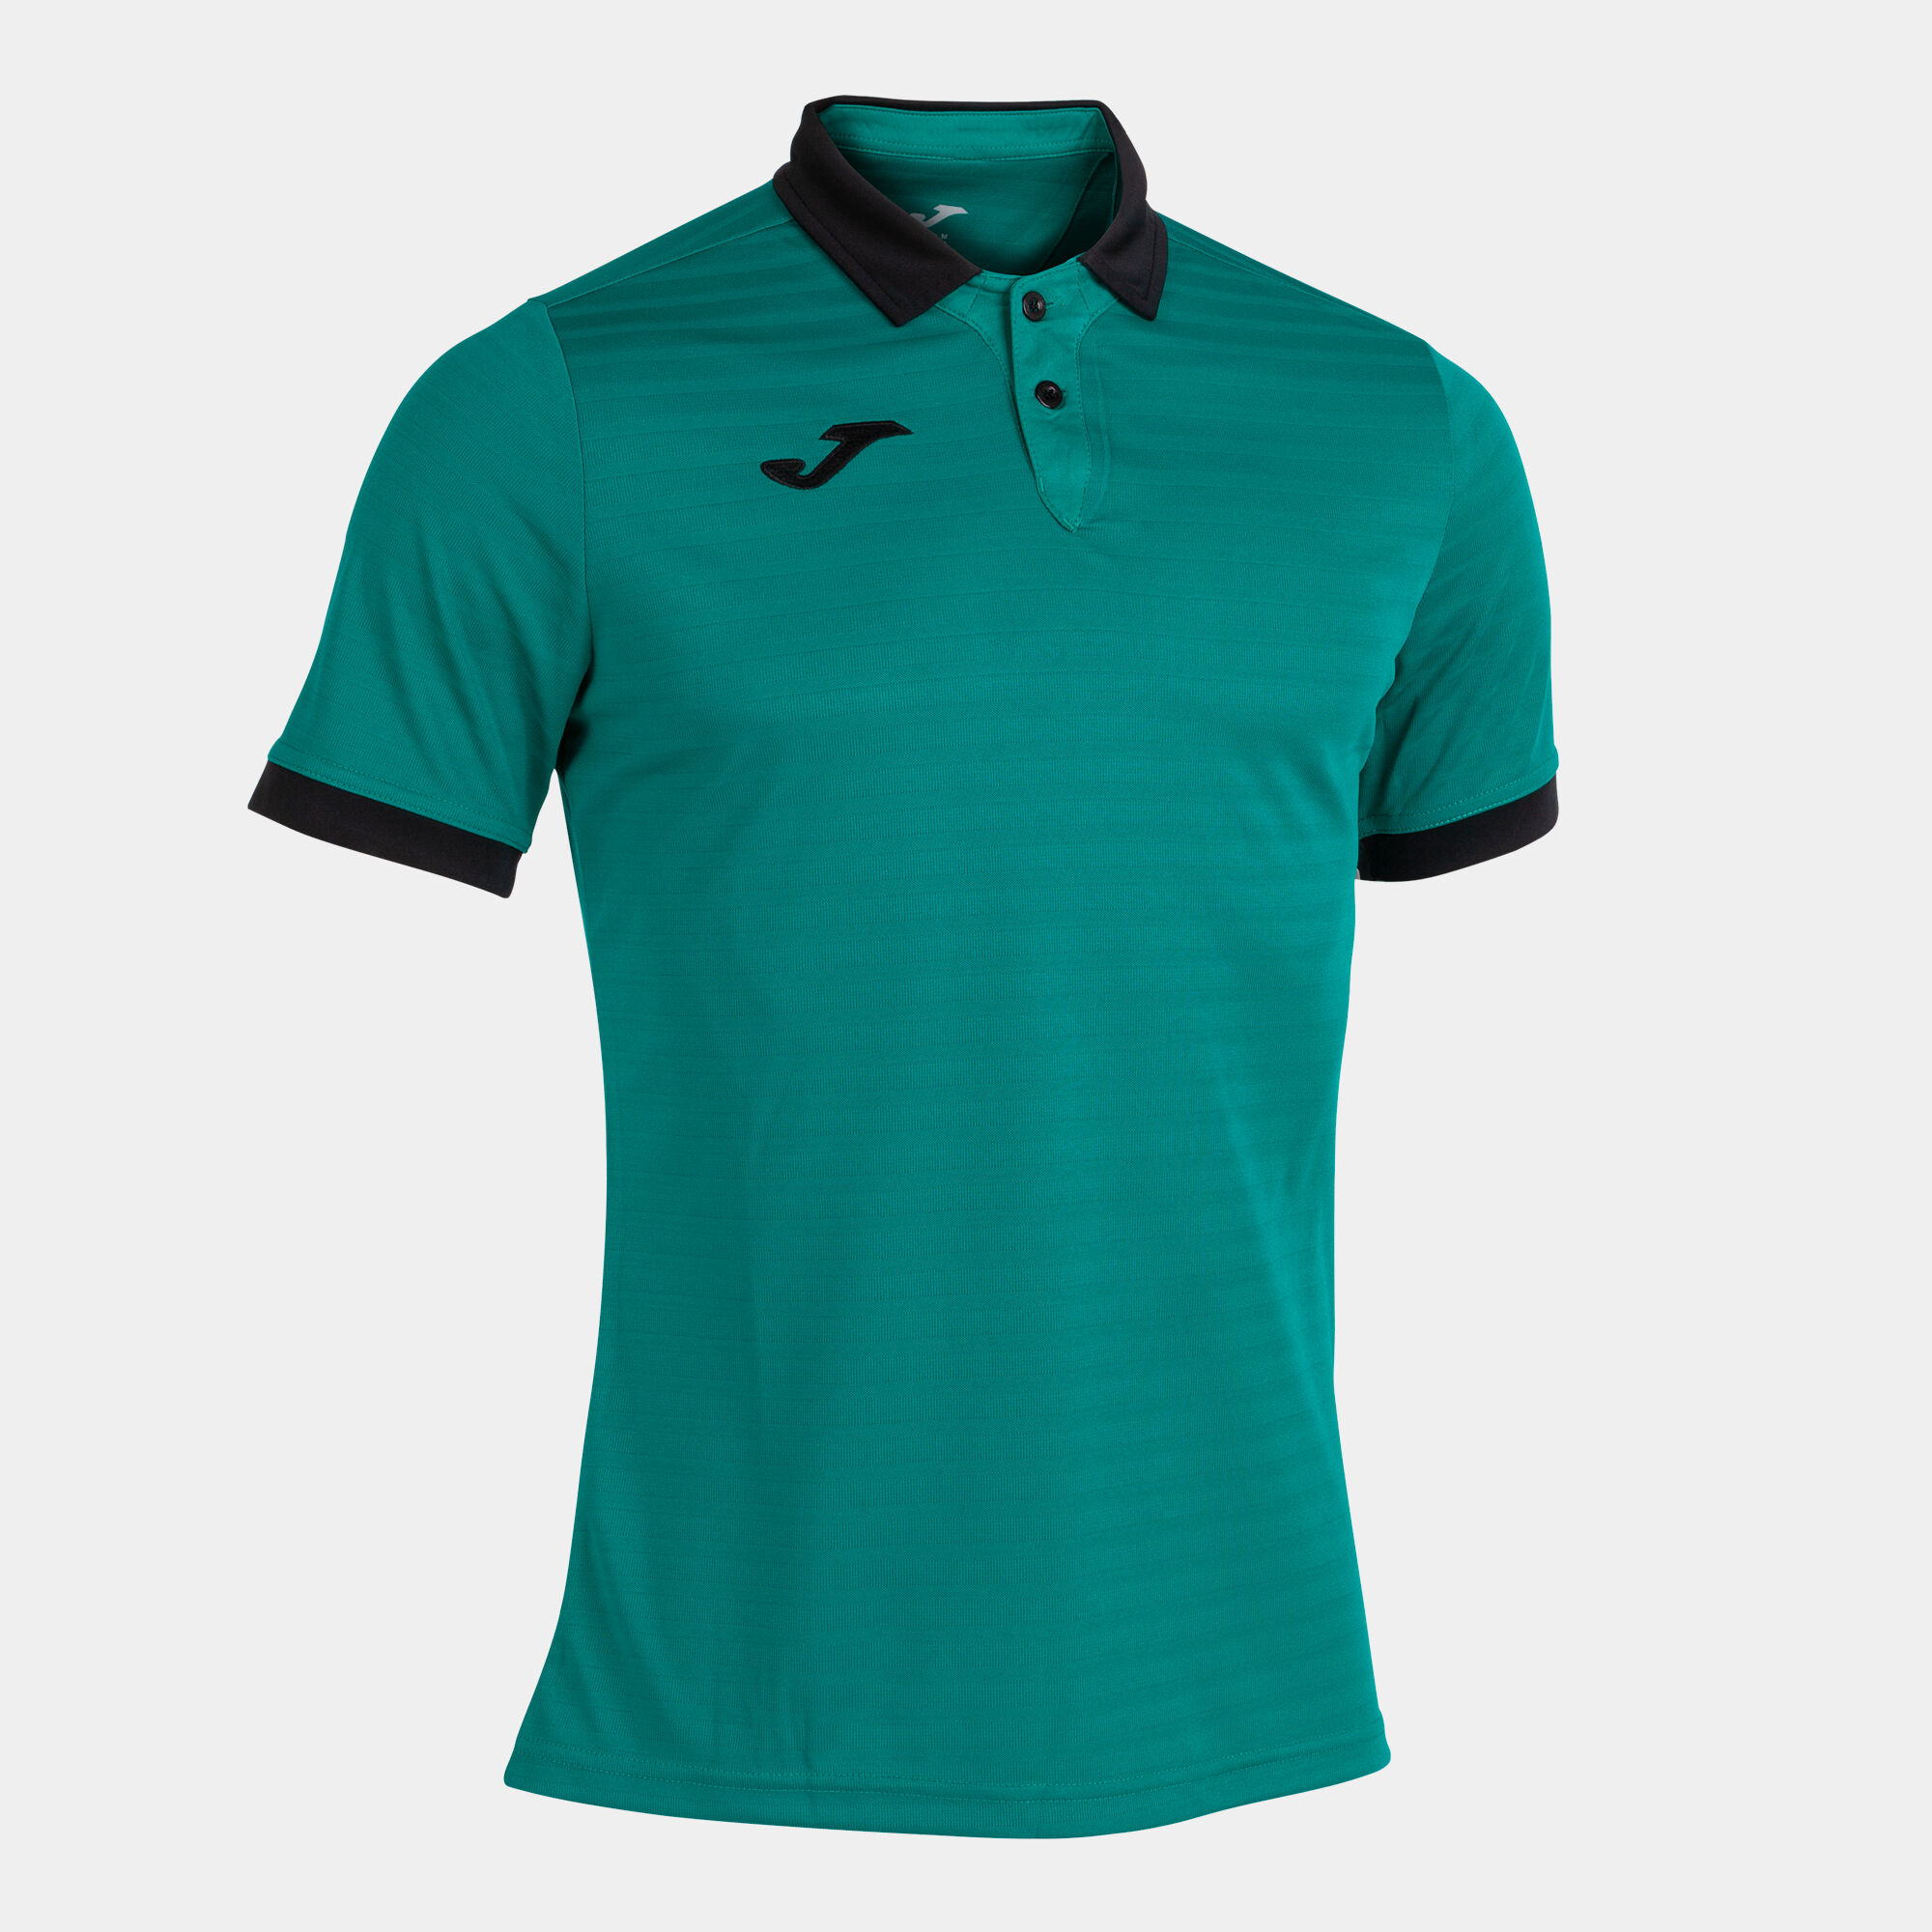 MAILLOT MANCHES COURTES HOMME GOLD II VERT